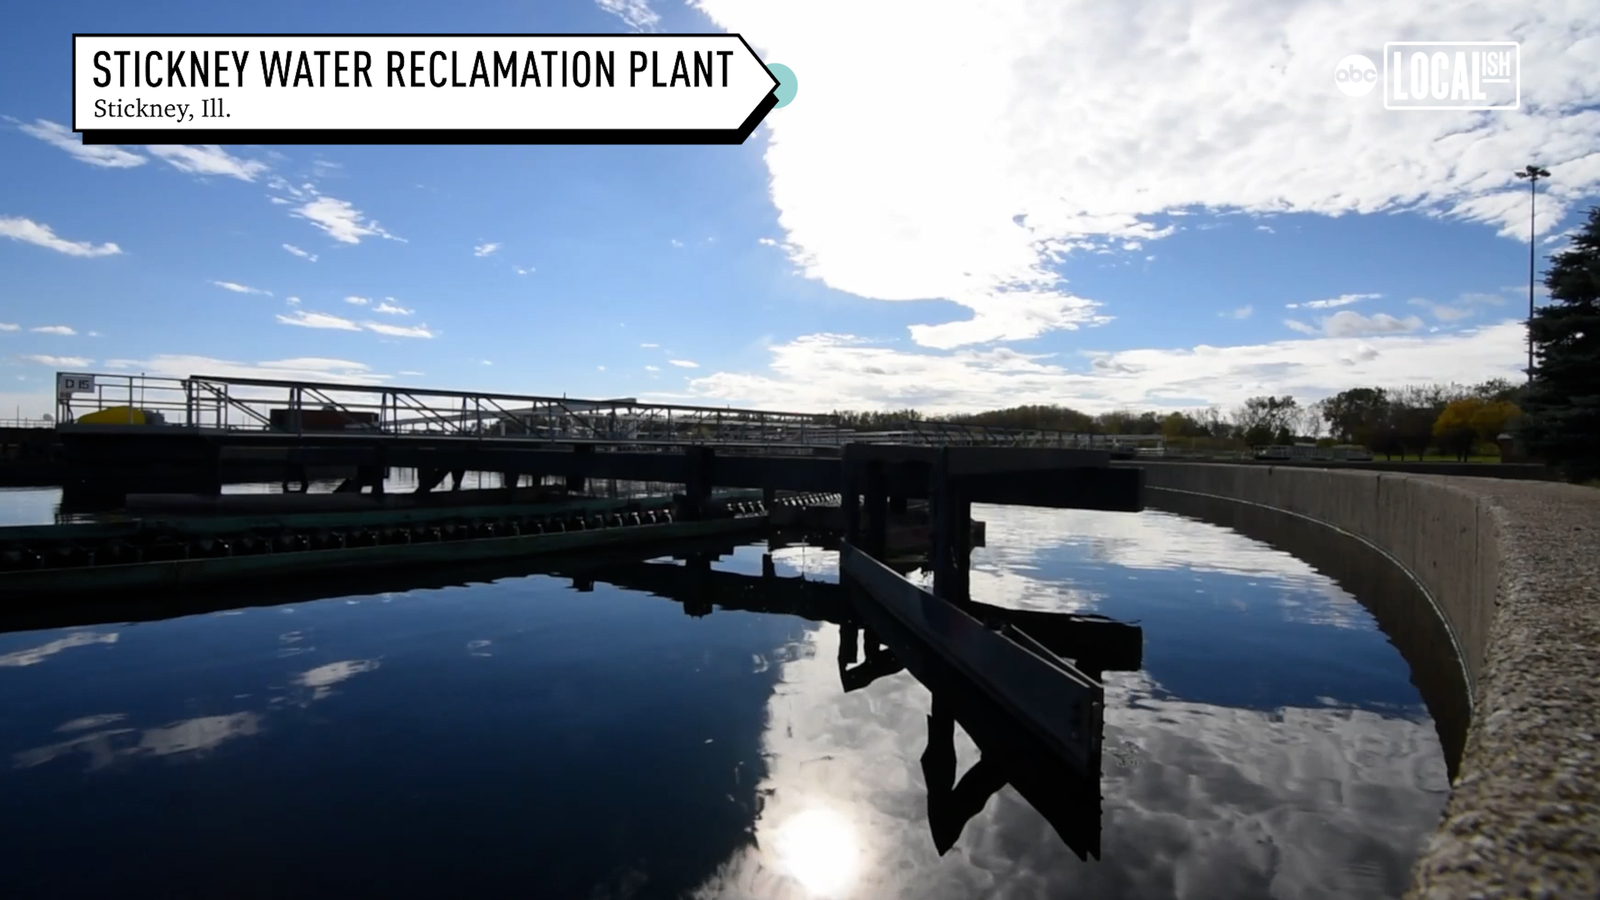 The world's largest wastewater treatment plant is in Stickney, Ill.